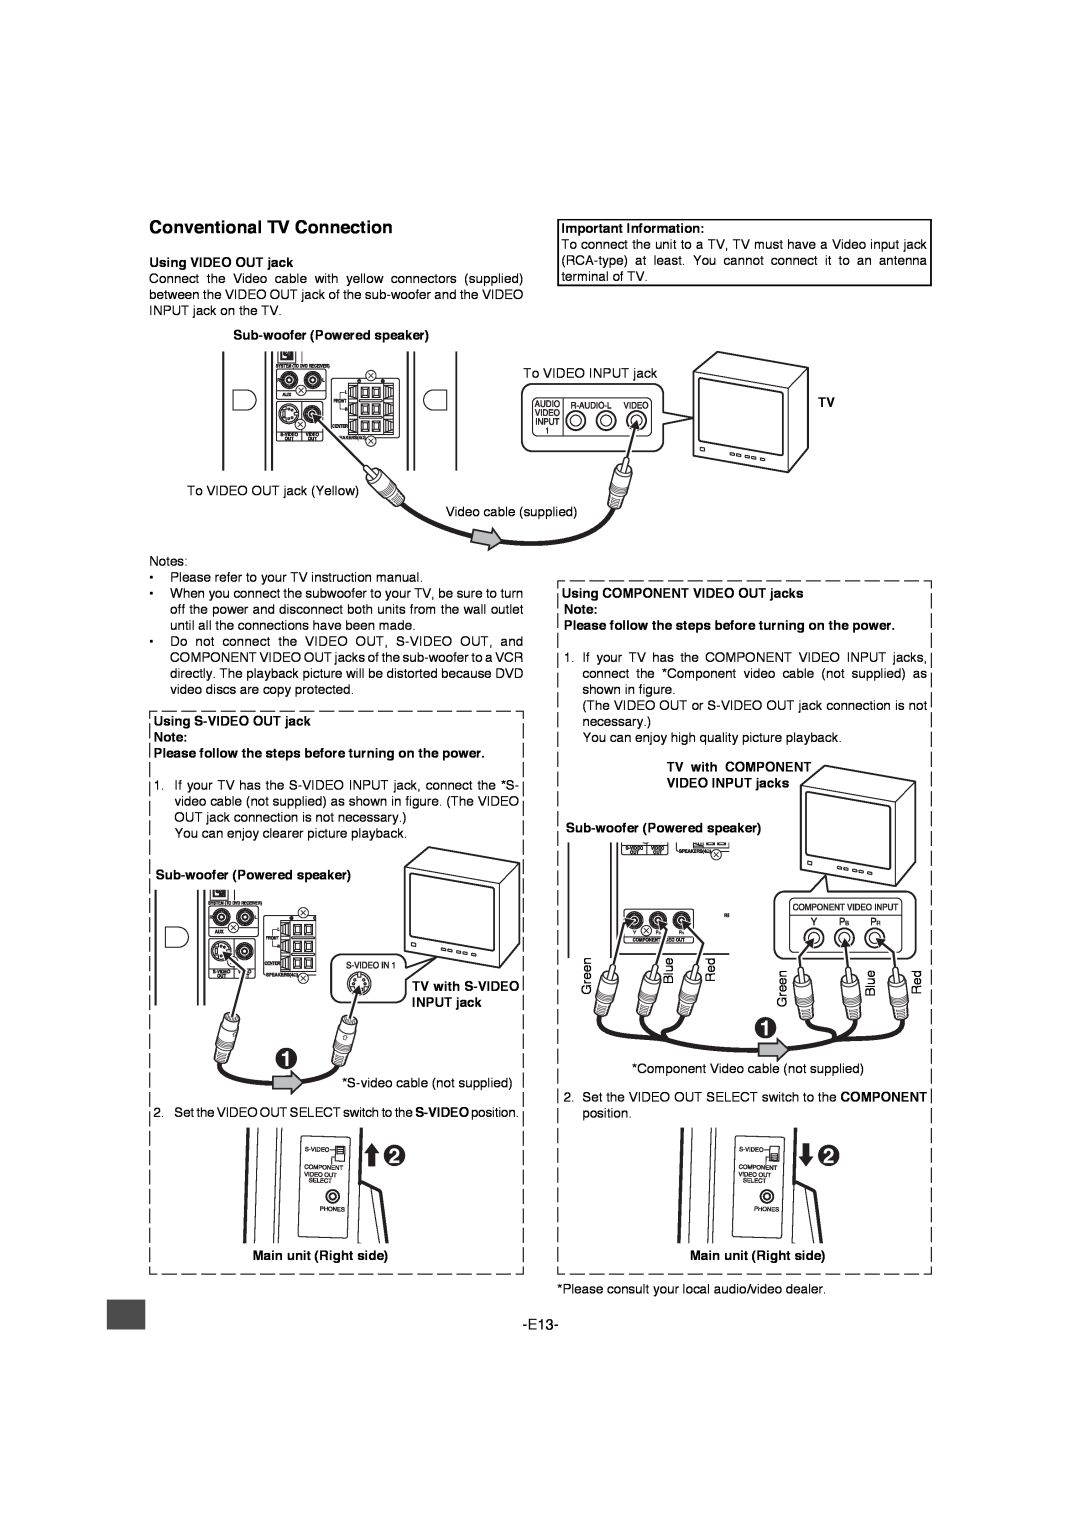 Sanyo DWM-4500 Conventional TV Connection, Using VIDEO OUT jack, Sub-wooferPowered speaker, Important Information 